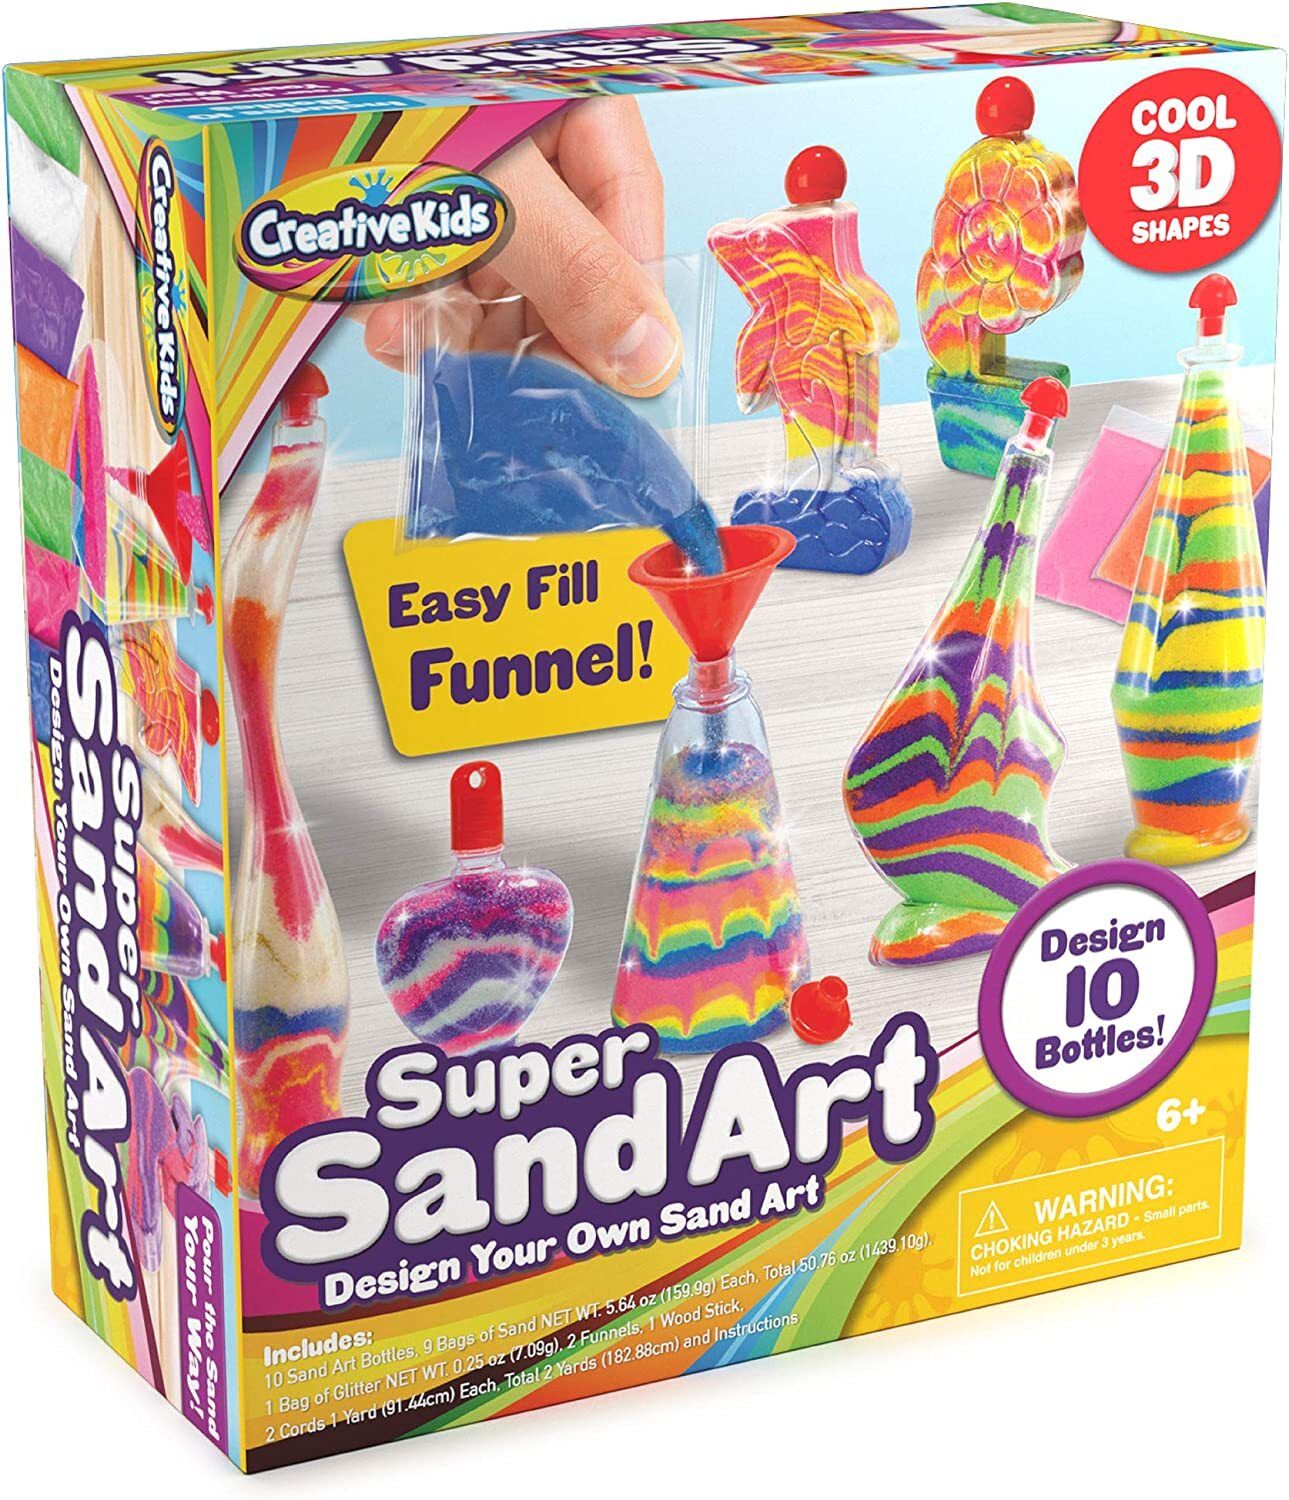 13 amazing gifts for creative kids that will inspire! - Twitchetts